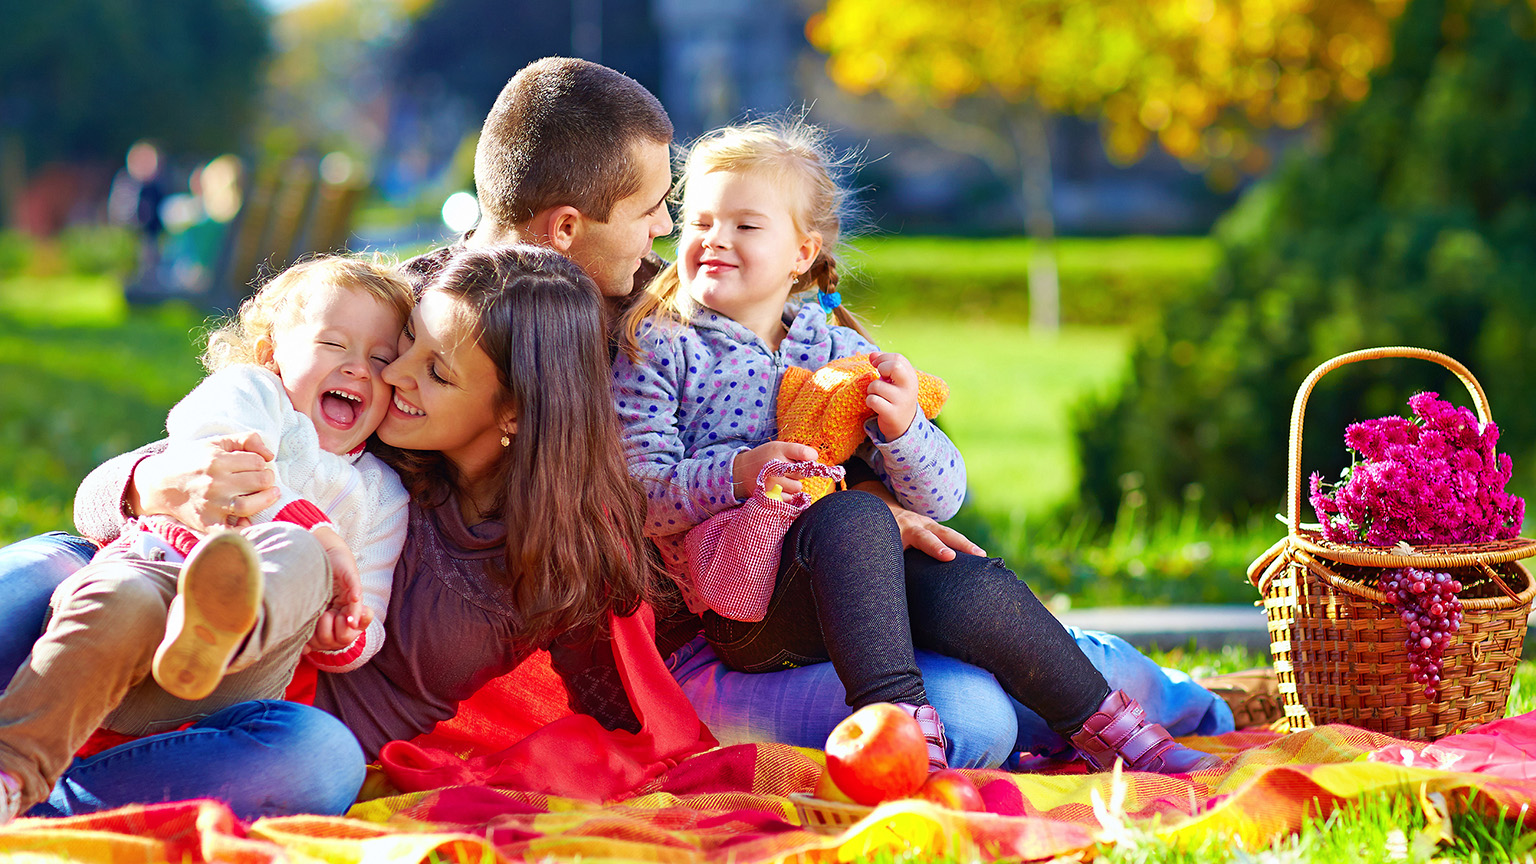 family enjoying the autumn outdoors together